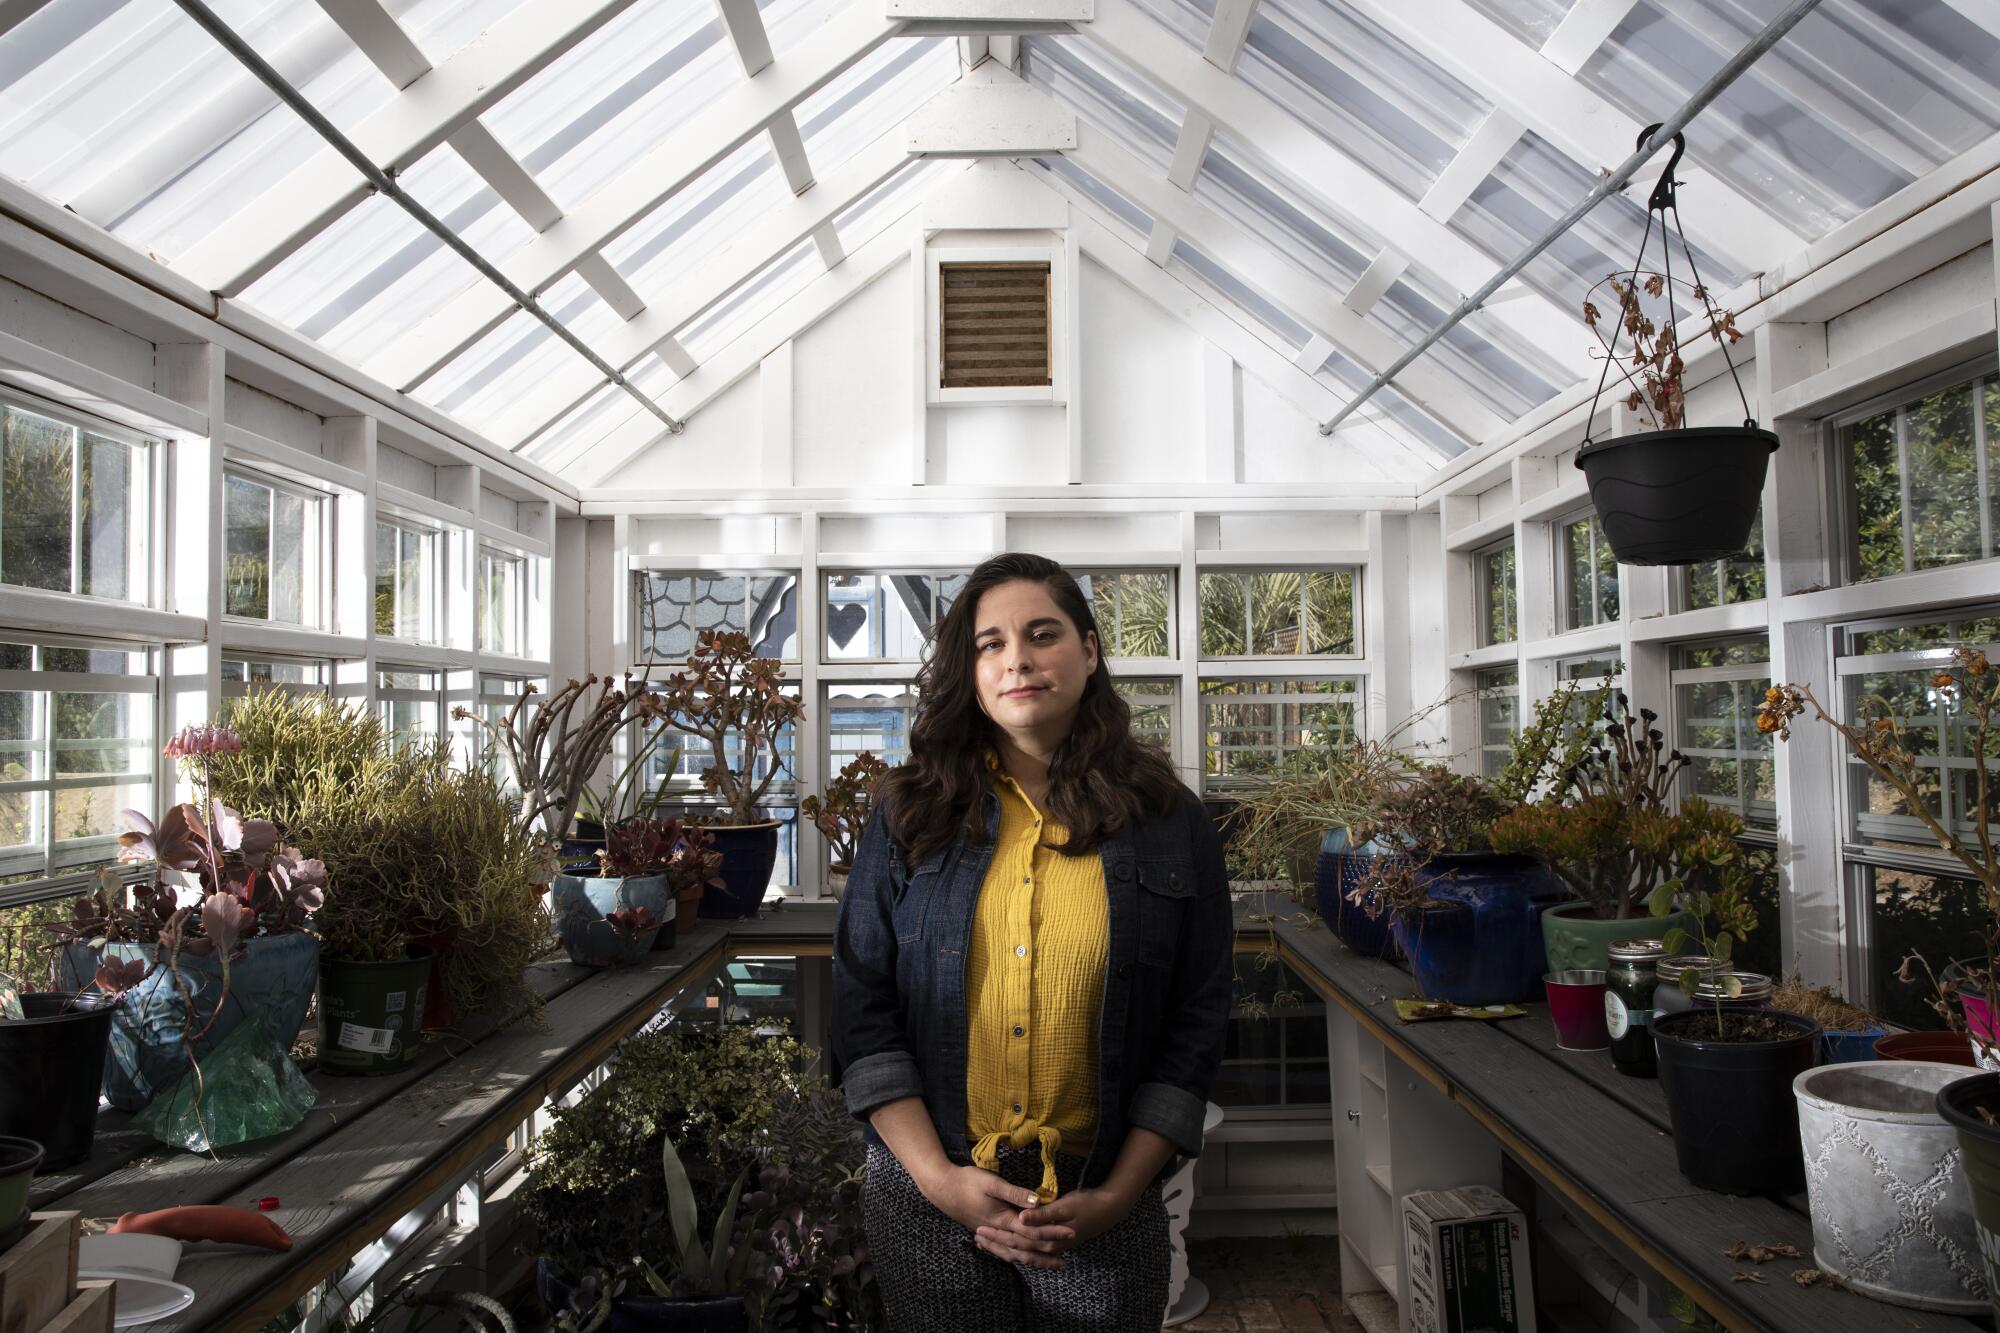 a woman stands in a greenhouse surrounded by potted plants and garden tools